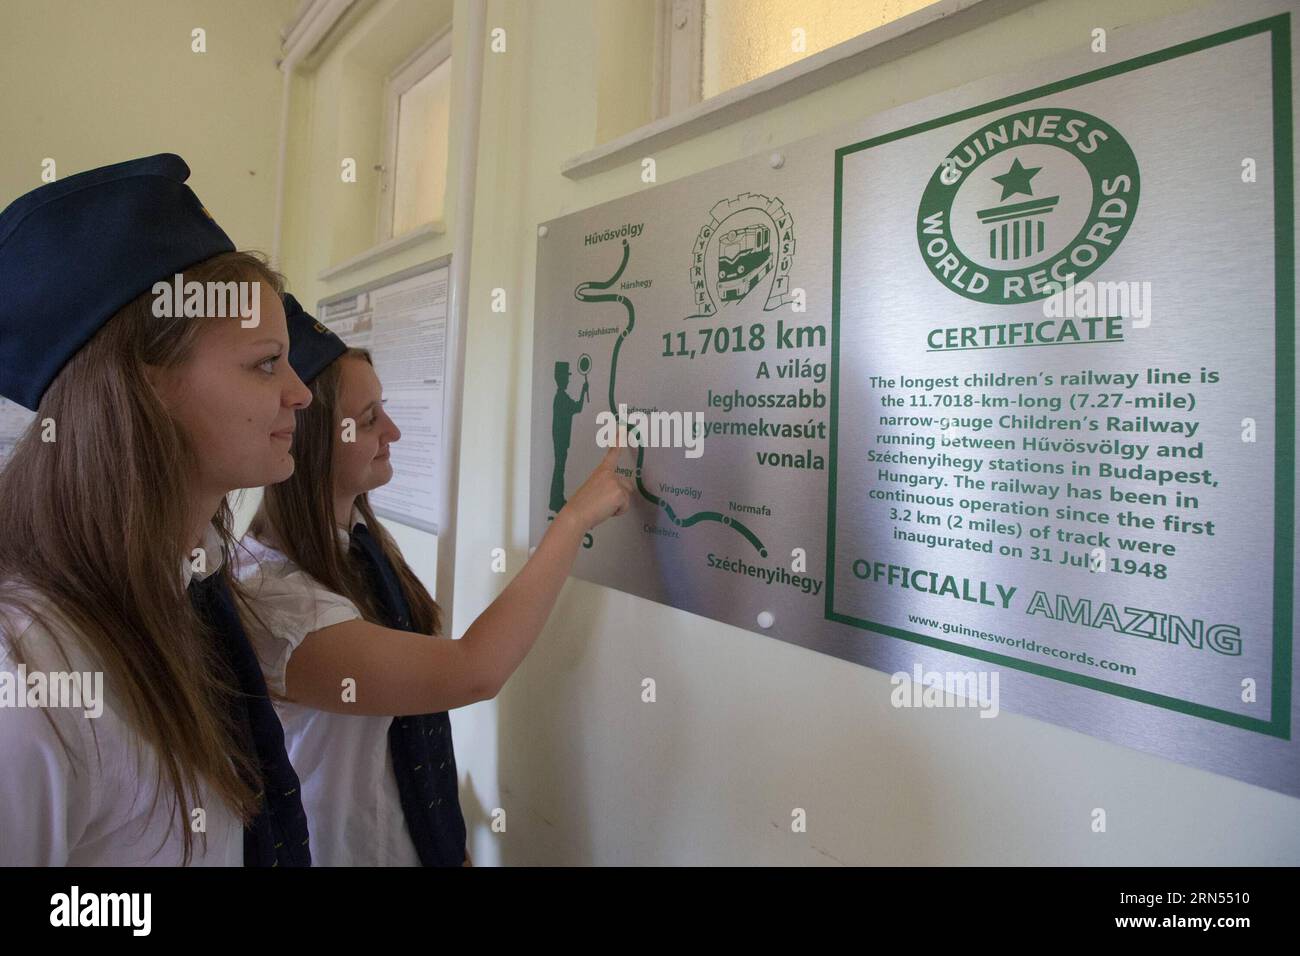 (150613) -- BUDAPEST, June 13, 2015 -- Girls watch the Guinness World Record plaque at Huvosvolgy station of the Children s Railway in Budapest, Hungary, June 13, 2015. The 11.7018 km narrow-gauge railway runs between Huvosvolgy and Szechenyihegy stations in Budapest. It has been in continuous operation since the first 3.2 km of track were inaugurated on July 31, 1948. The engines are driven by adult engineers, and children aged 10 to 14 on duty are continuously supervised by adult railway employees. Apart from that, children do their jobs on their own. The Children s Railway has received the Stock Photo